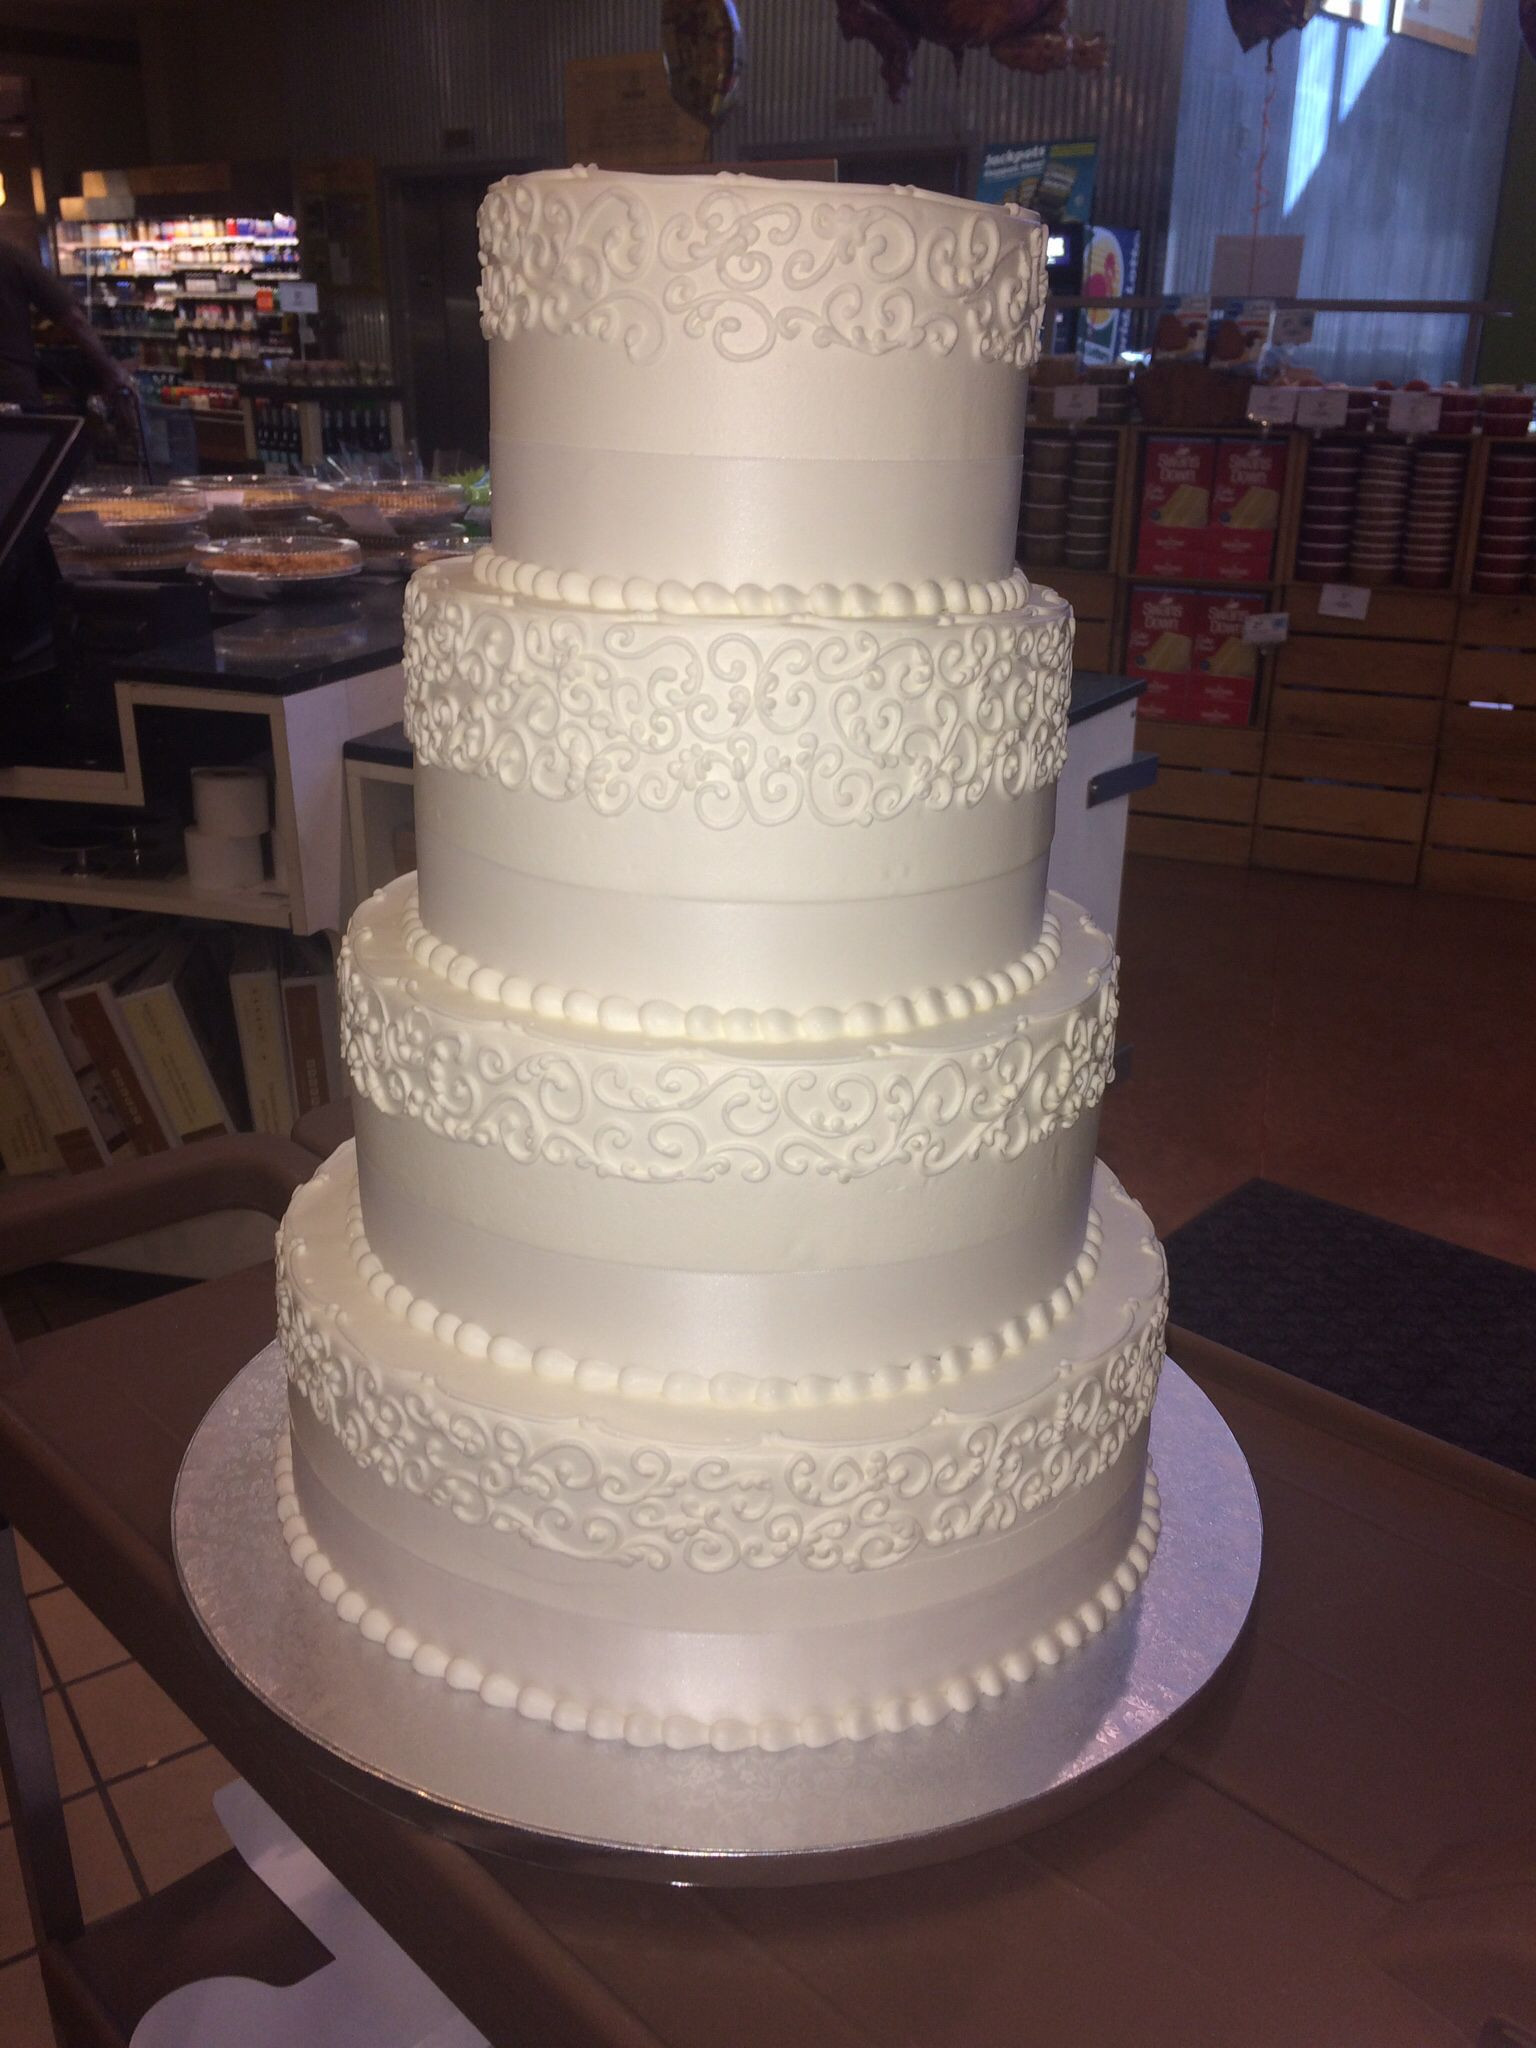 Wedding Cakes From Publix
 Publix GreenWise wedding cake Hyde Park Tampa FL